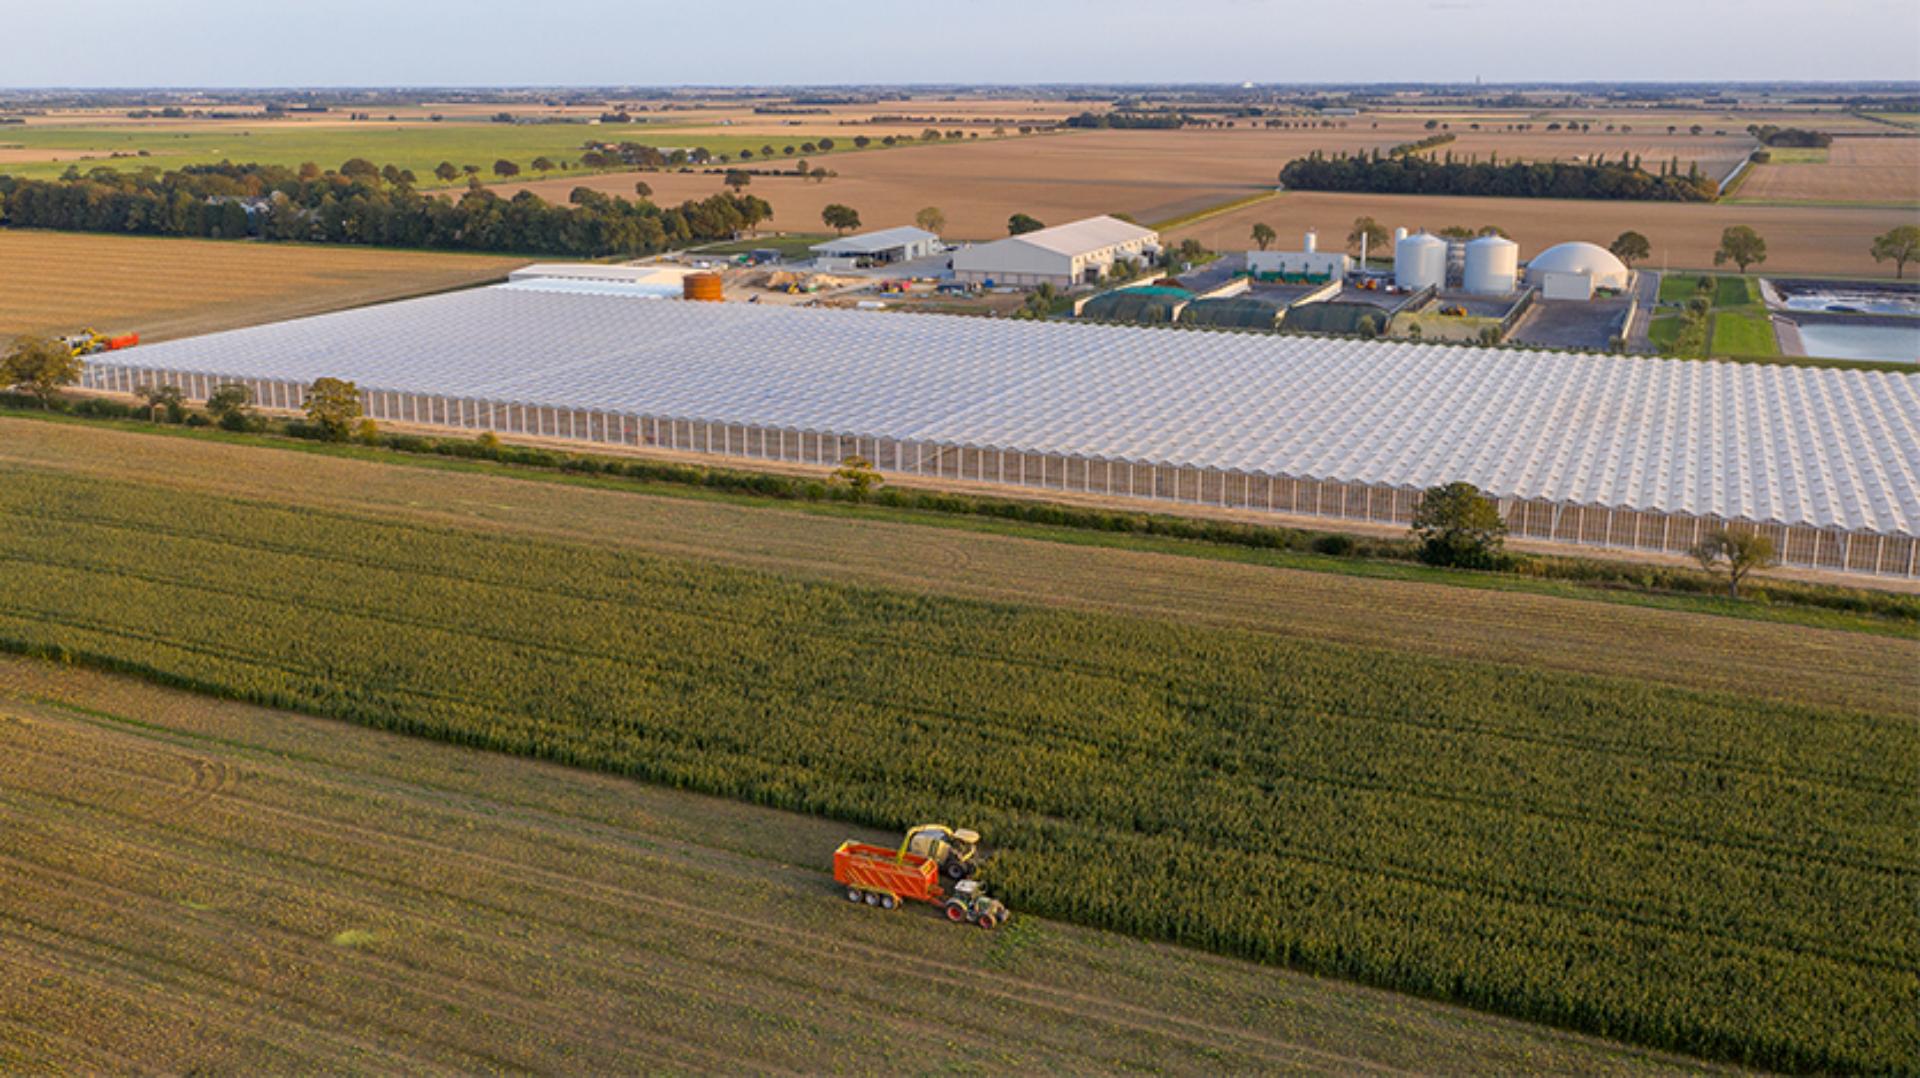 Aerial view of Dyson Farming greenhouses in Lincolnshire